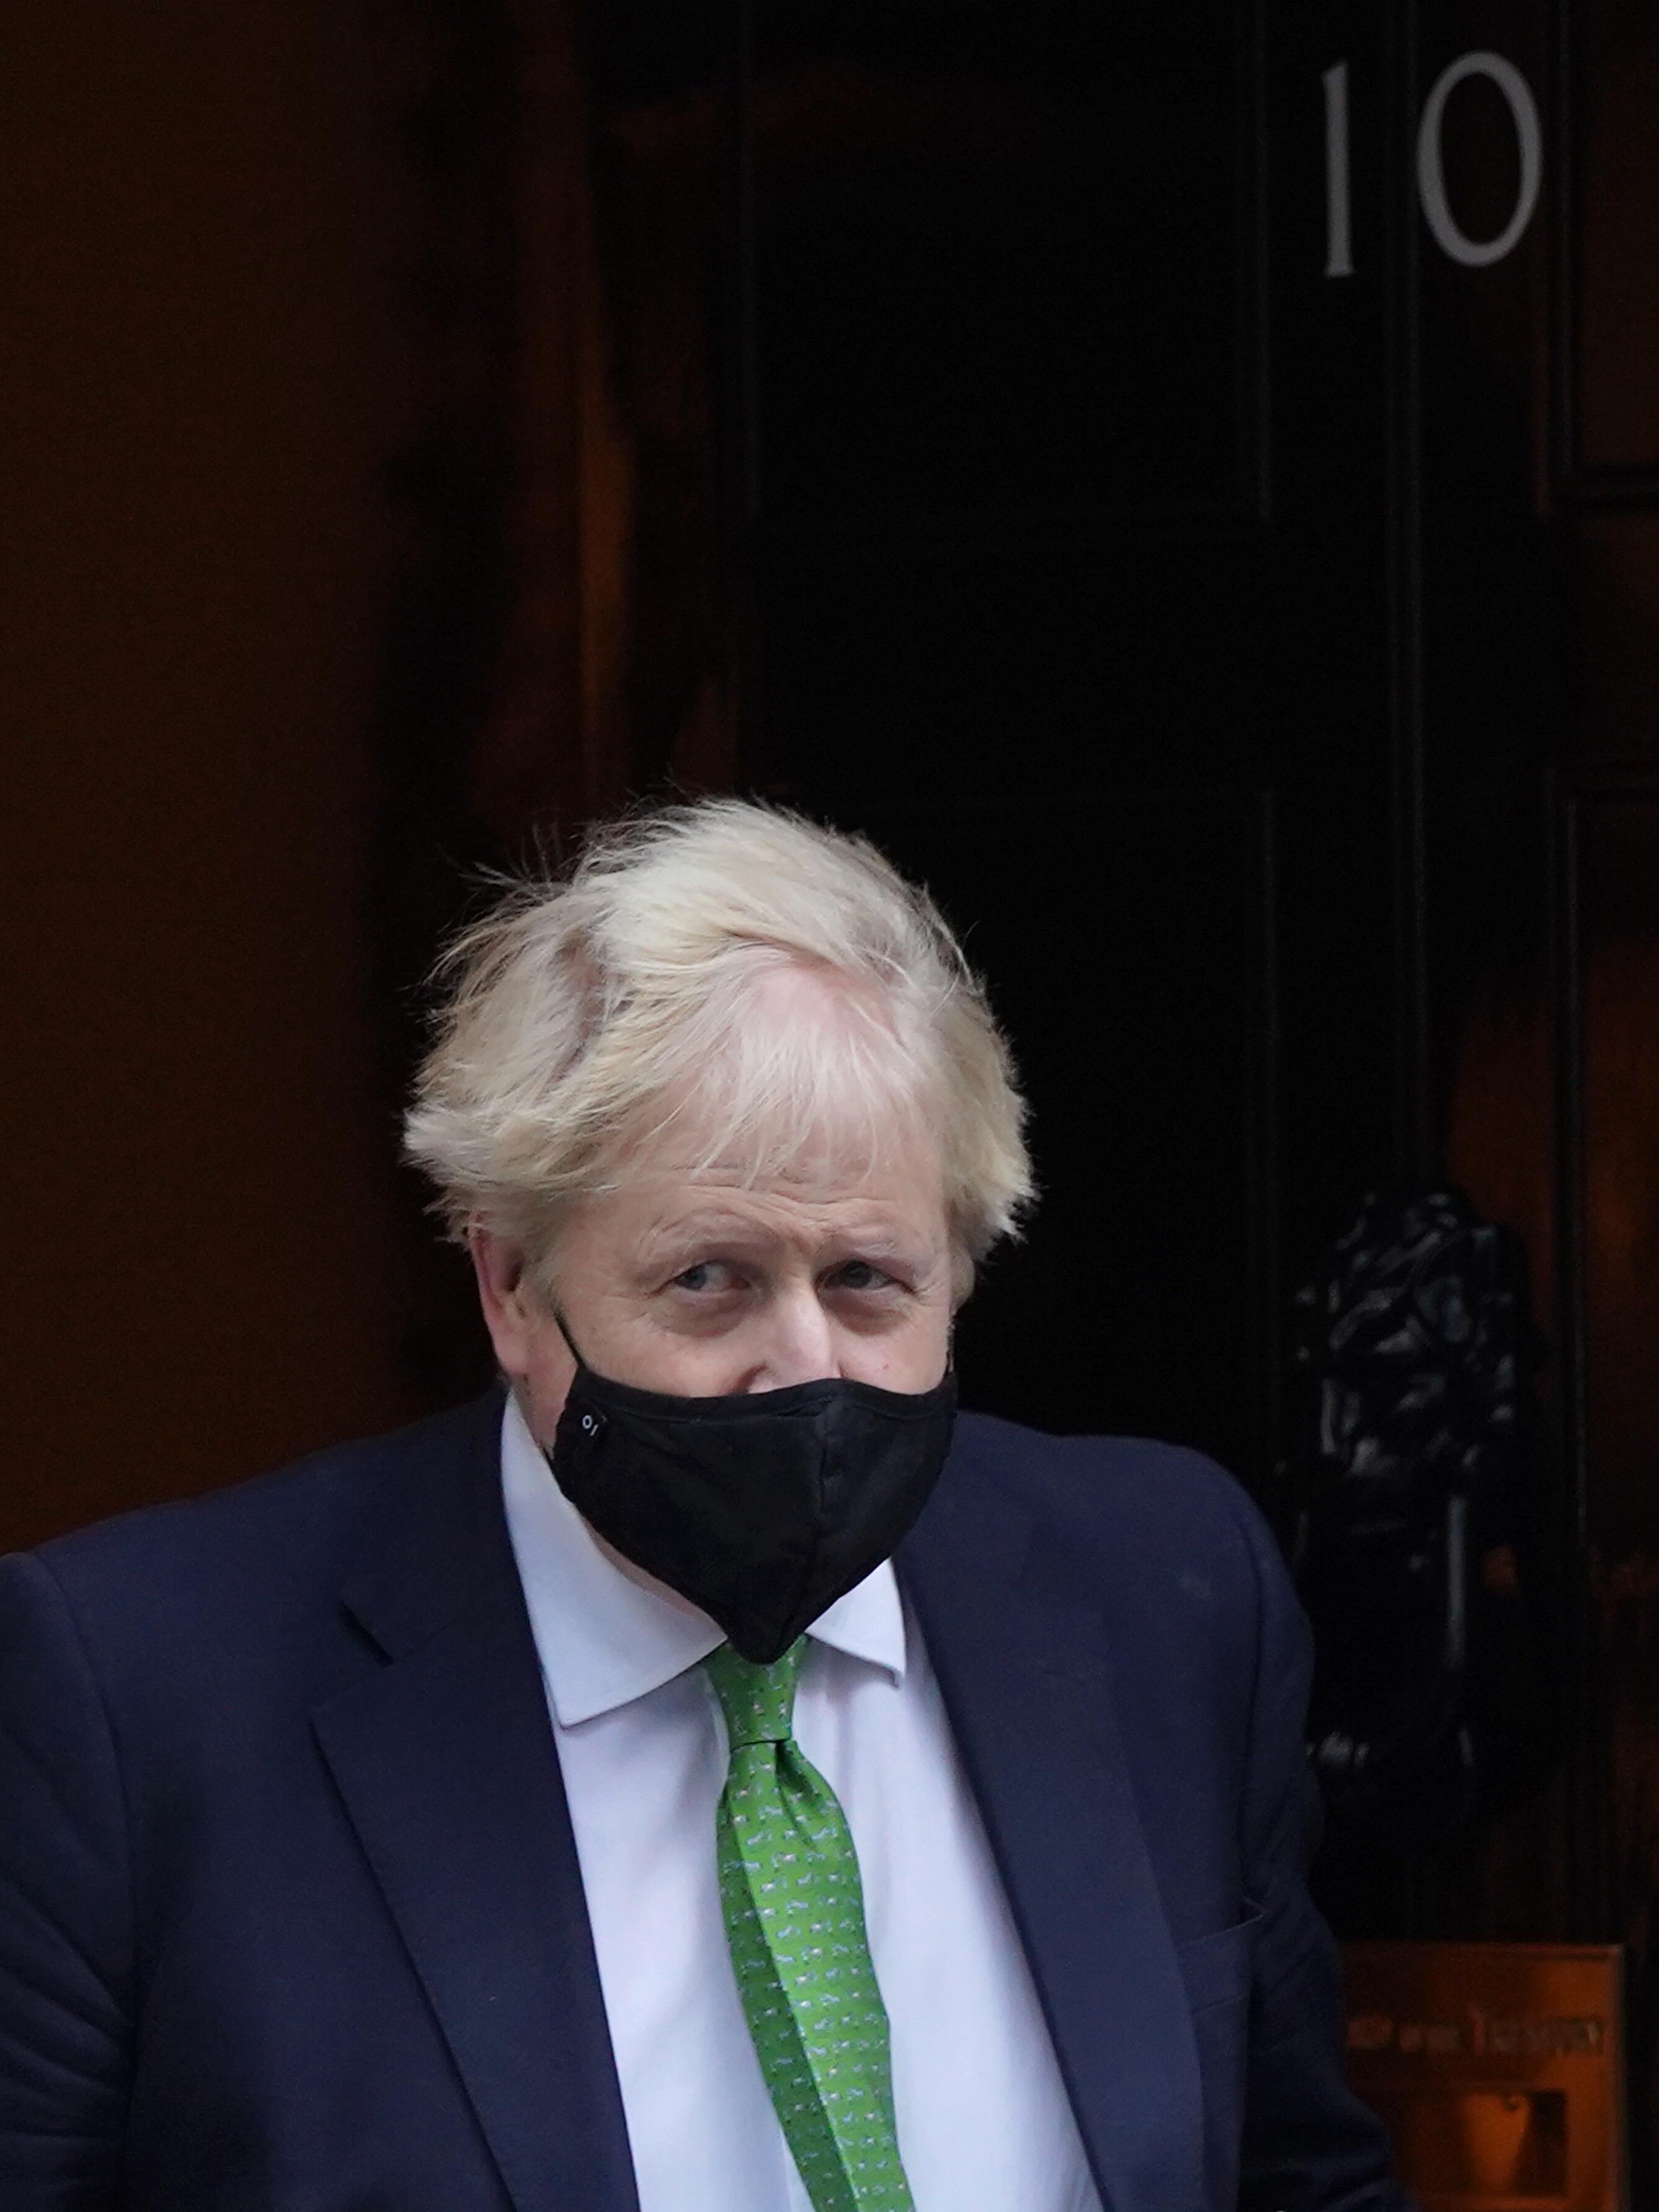 Prime Minister Boris Johnson leaves 10 Downing Street, London, to attend Prime Minister’s Questions at the Houses of Parliament. Picture date: Wednesday January 19, 2022.